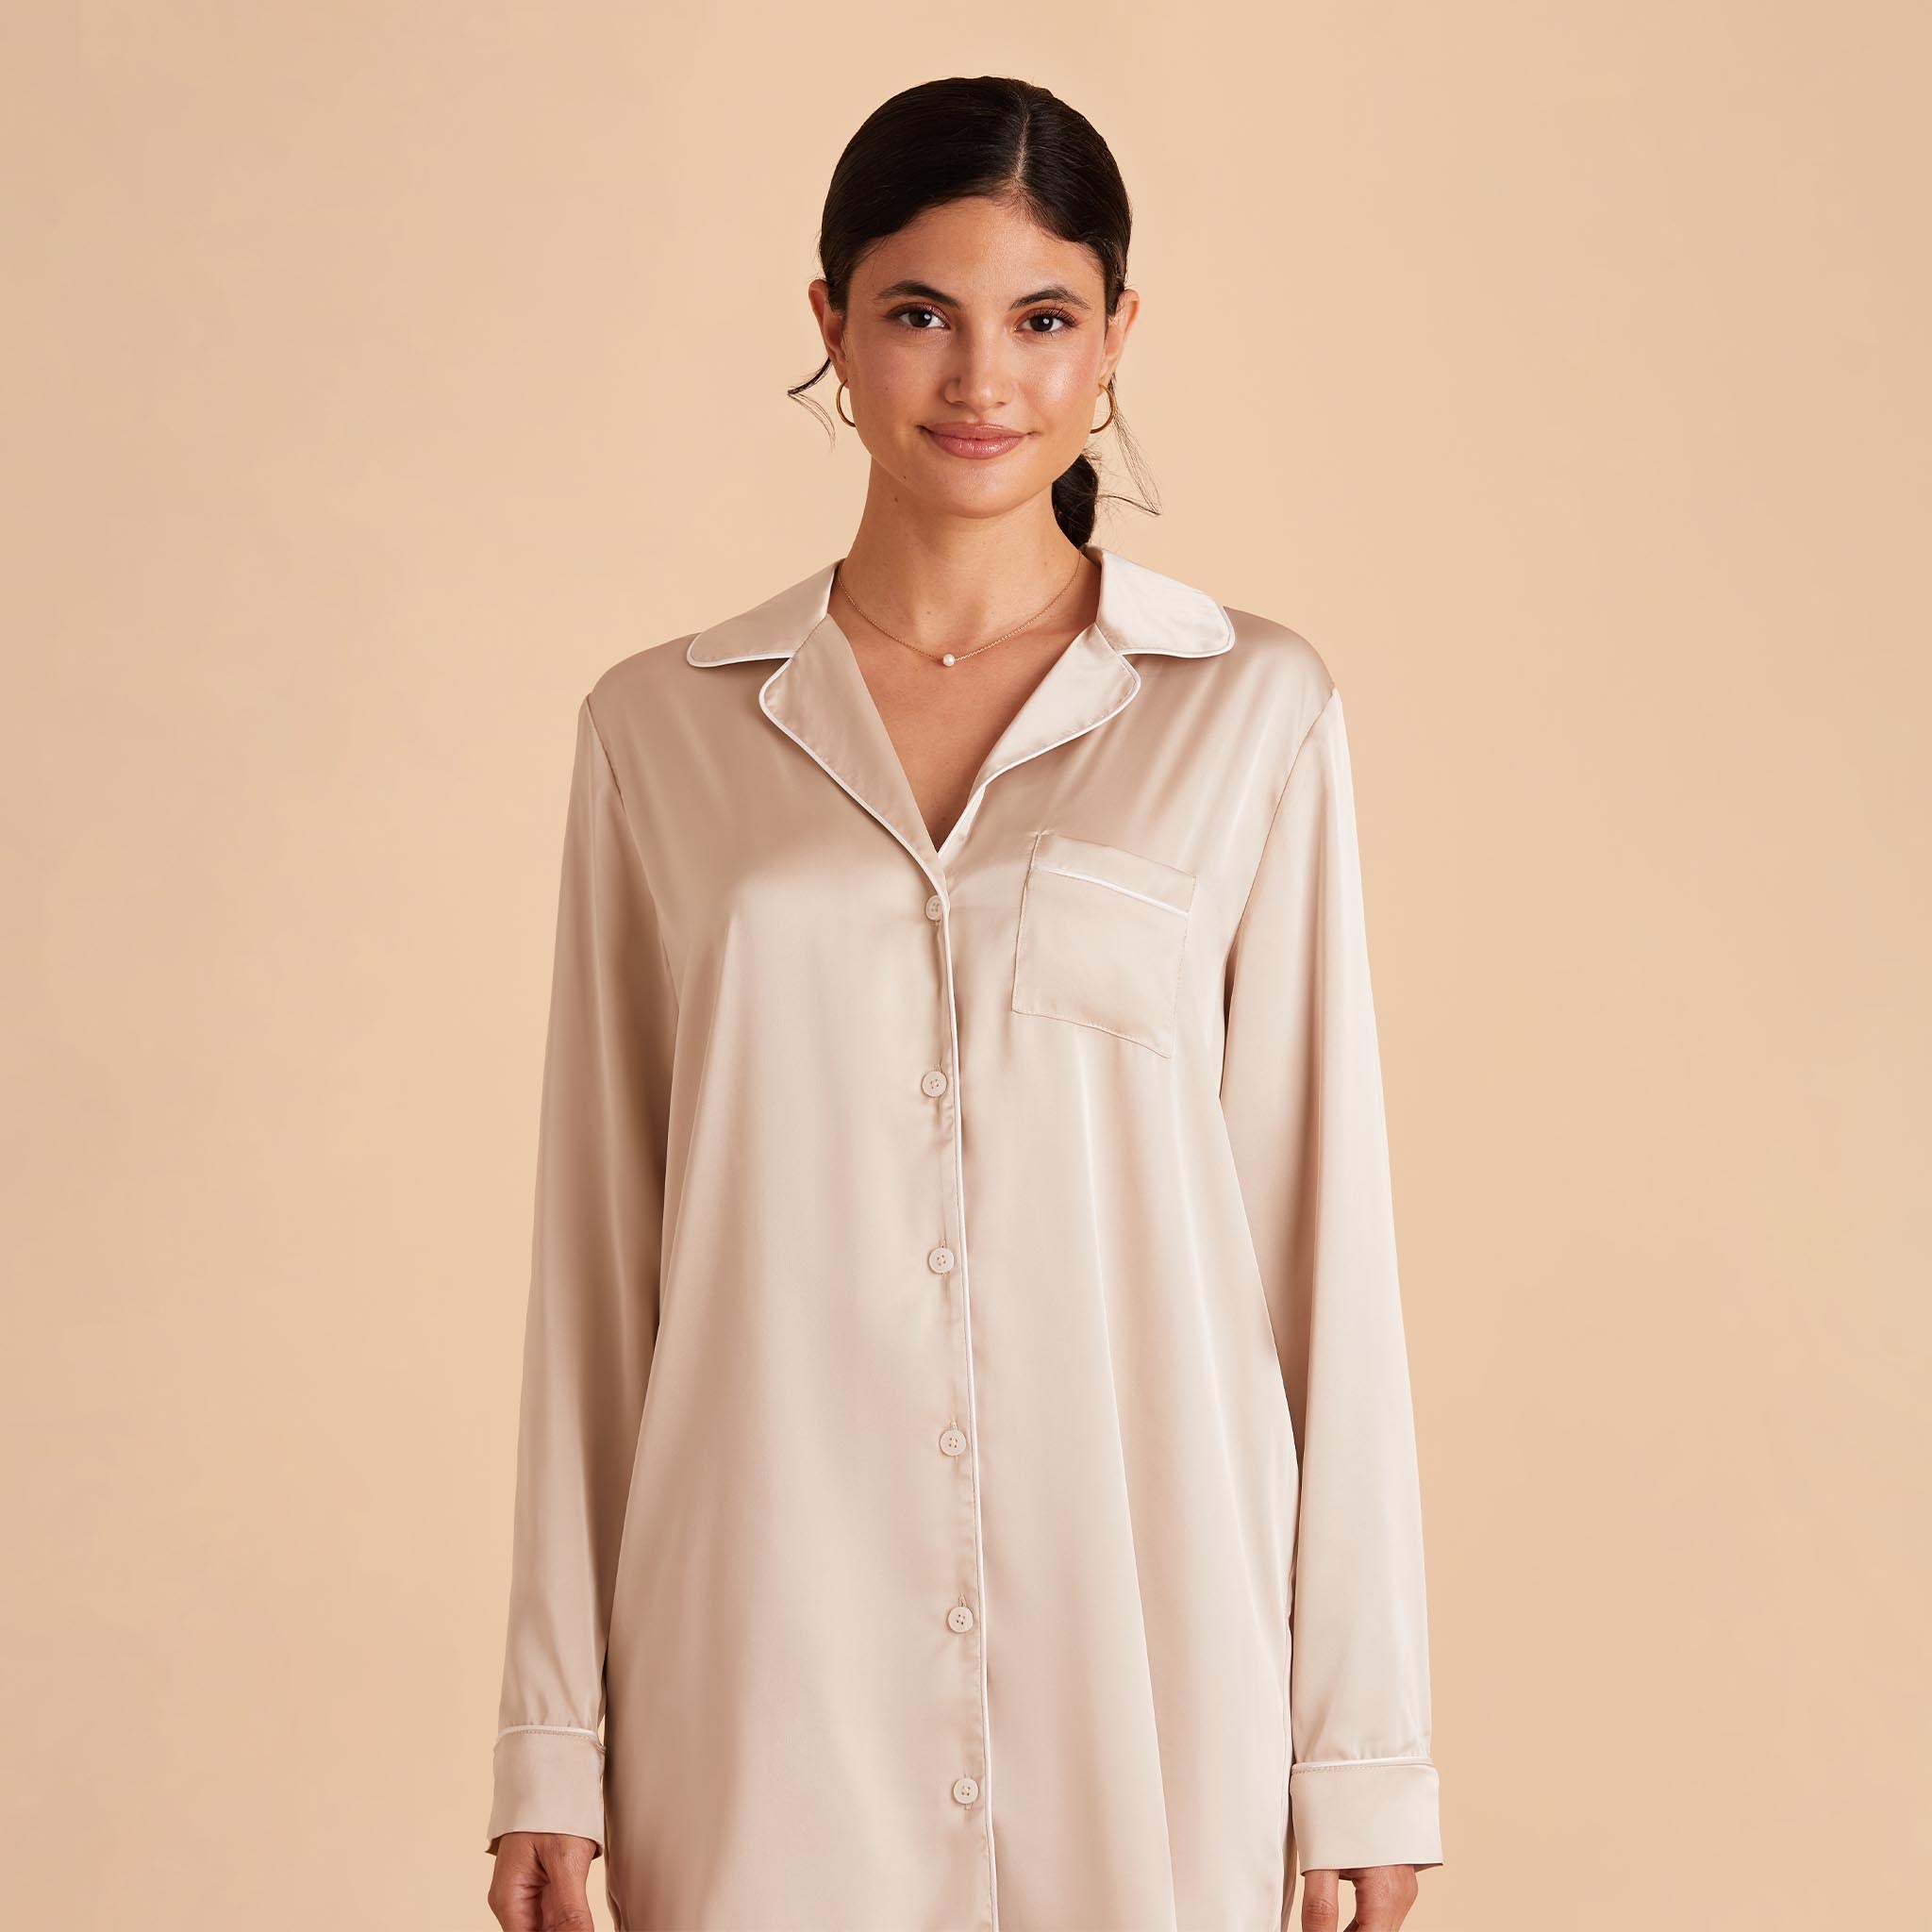 Satin Sleepshirt in champagne by Birdy Grey, front view